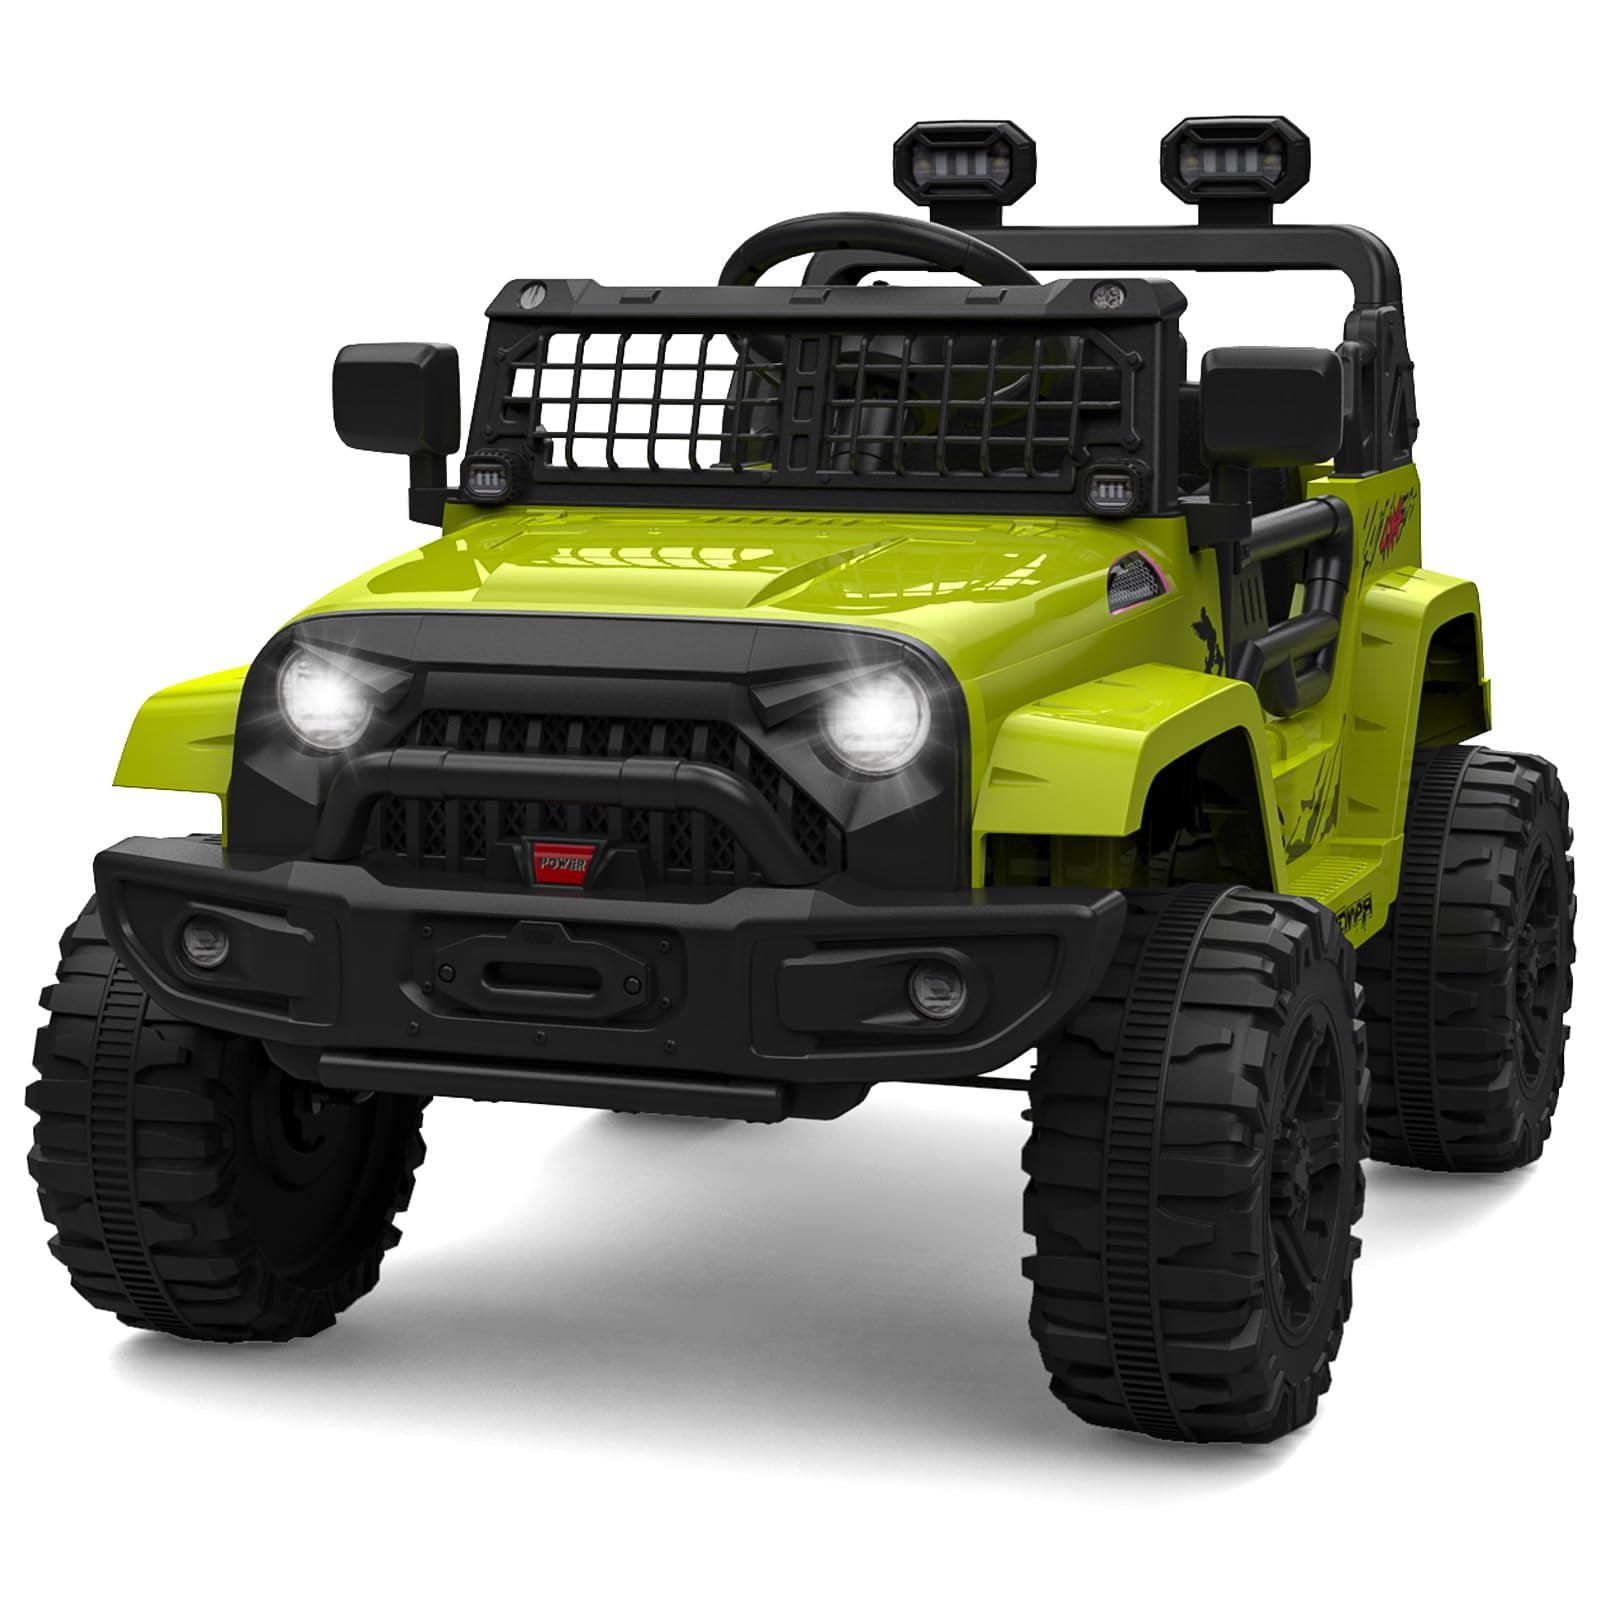 Ride on Truck Car 12V Kids Electric Mini Jeep with Remote Control Spring Suspension, LED Lights, Bluetooth, 2 Speeds (Green) - image 1 of 8